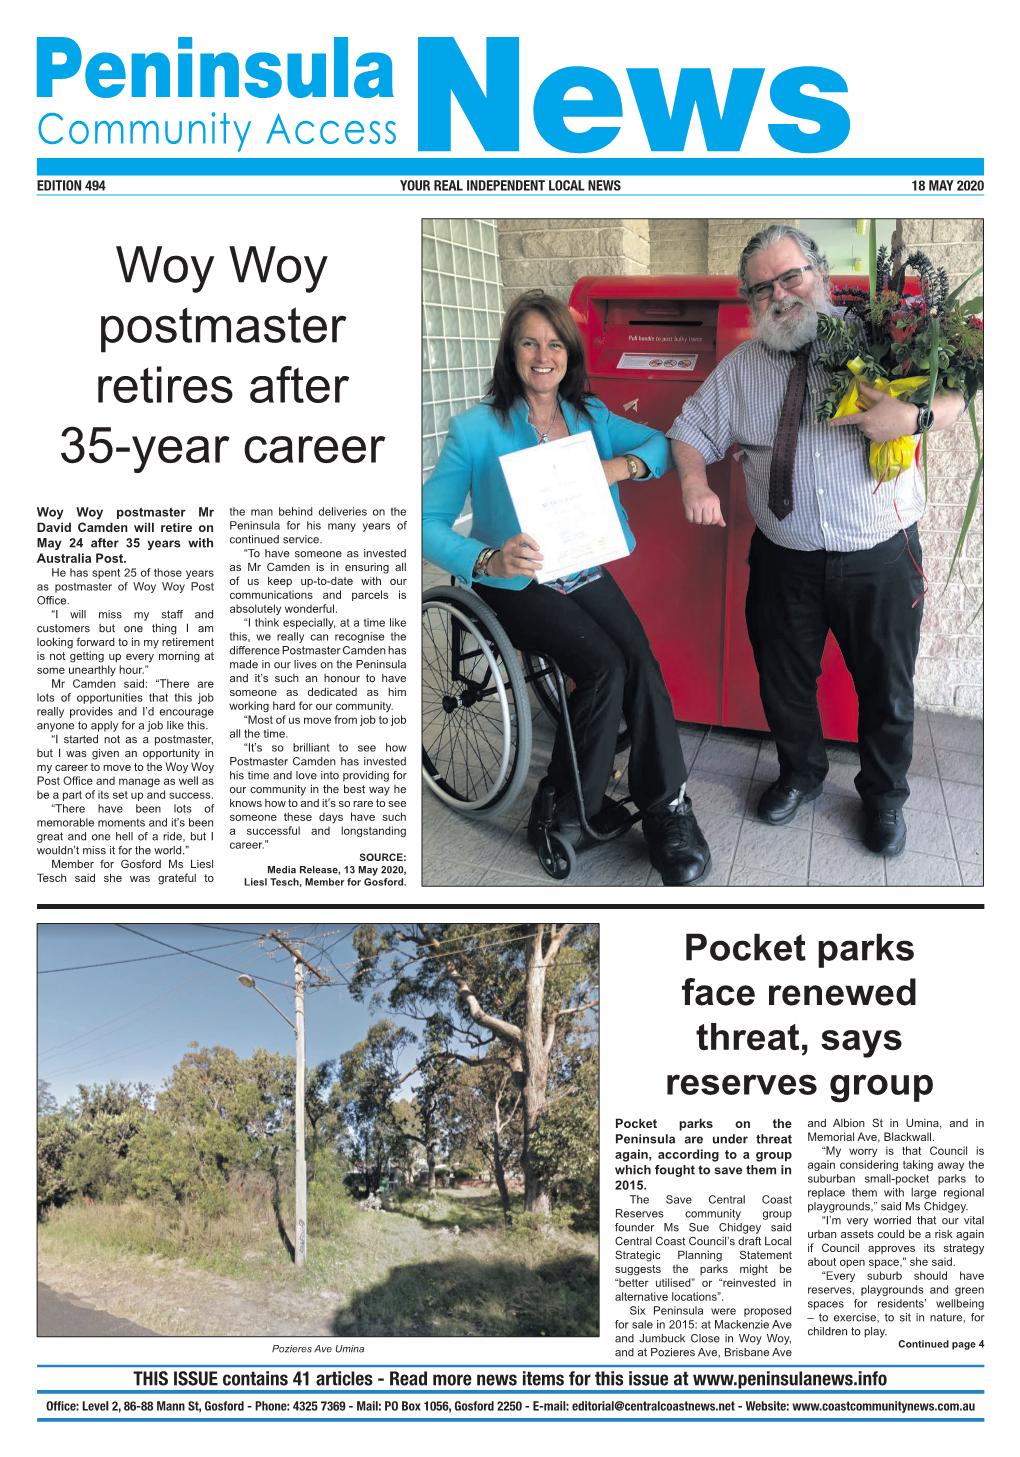 Woy Woy Postmaster Retires After 35-Year Career